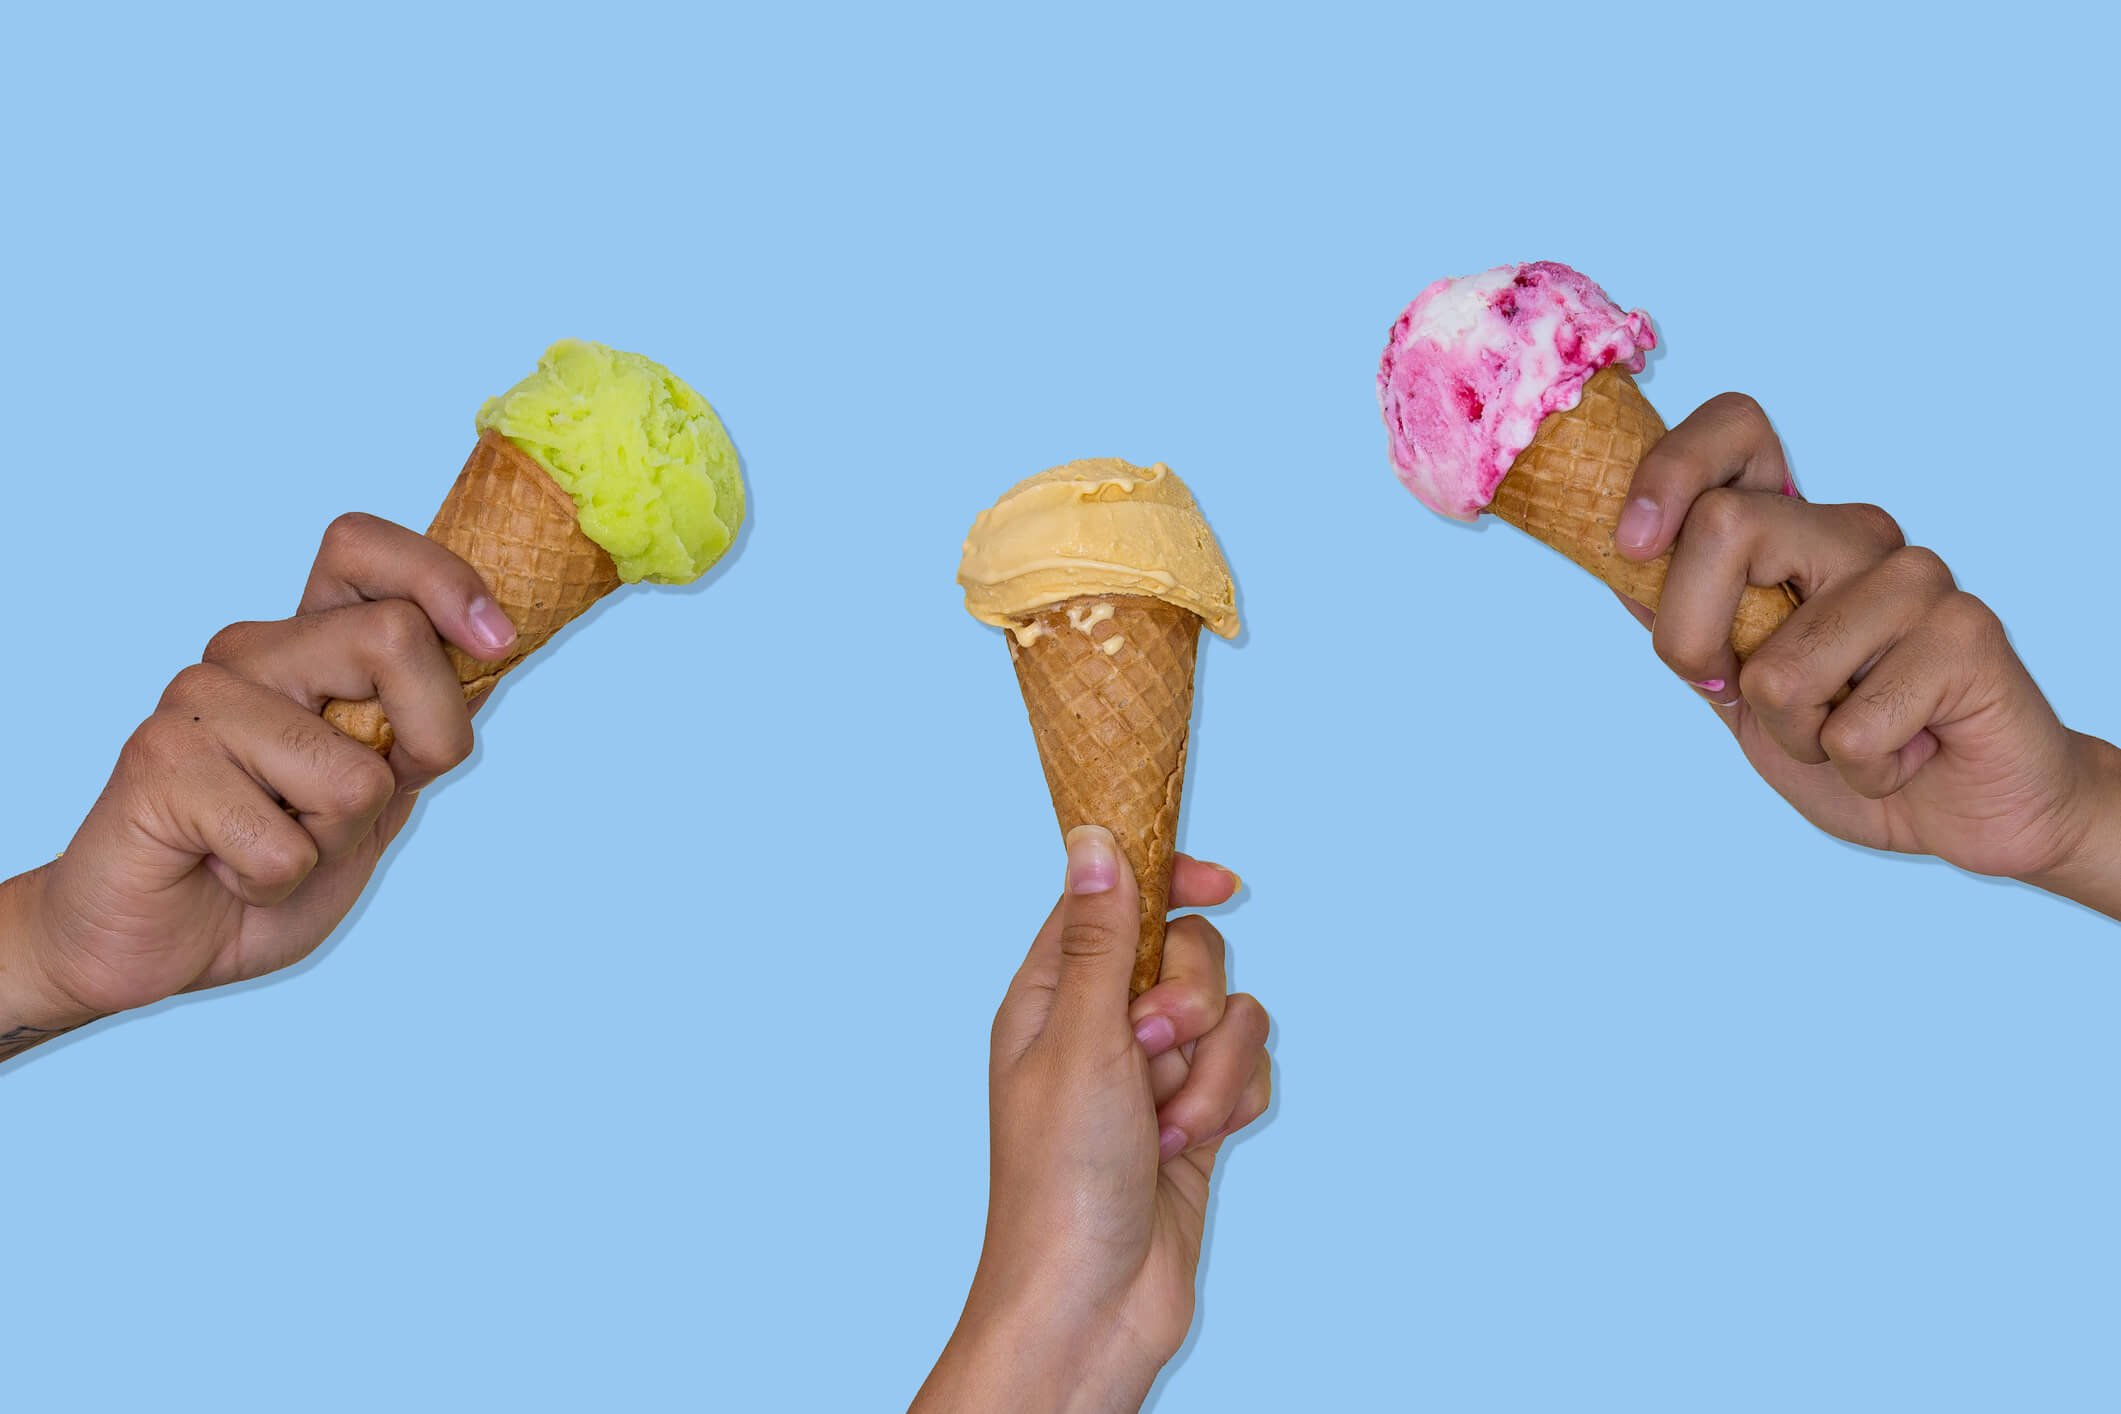 This is the most popular ice cream flavor among Americans